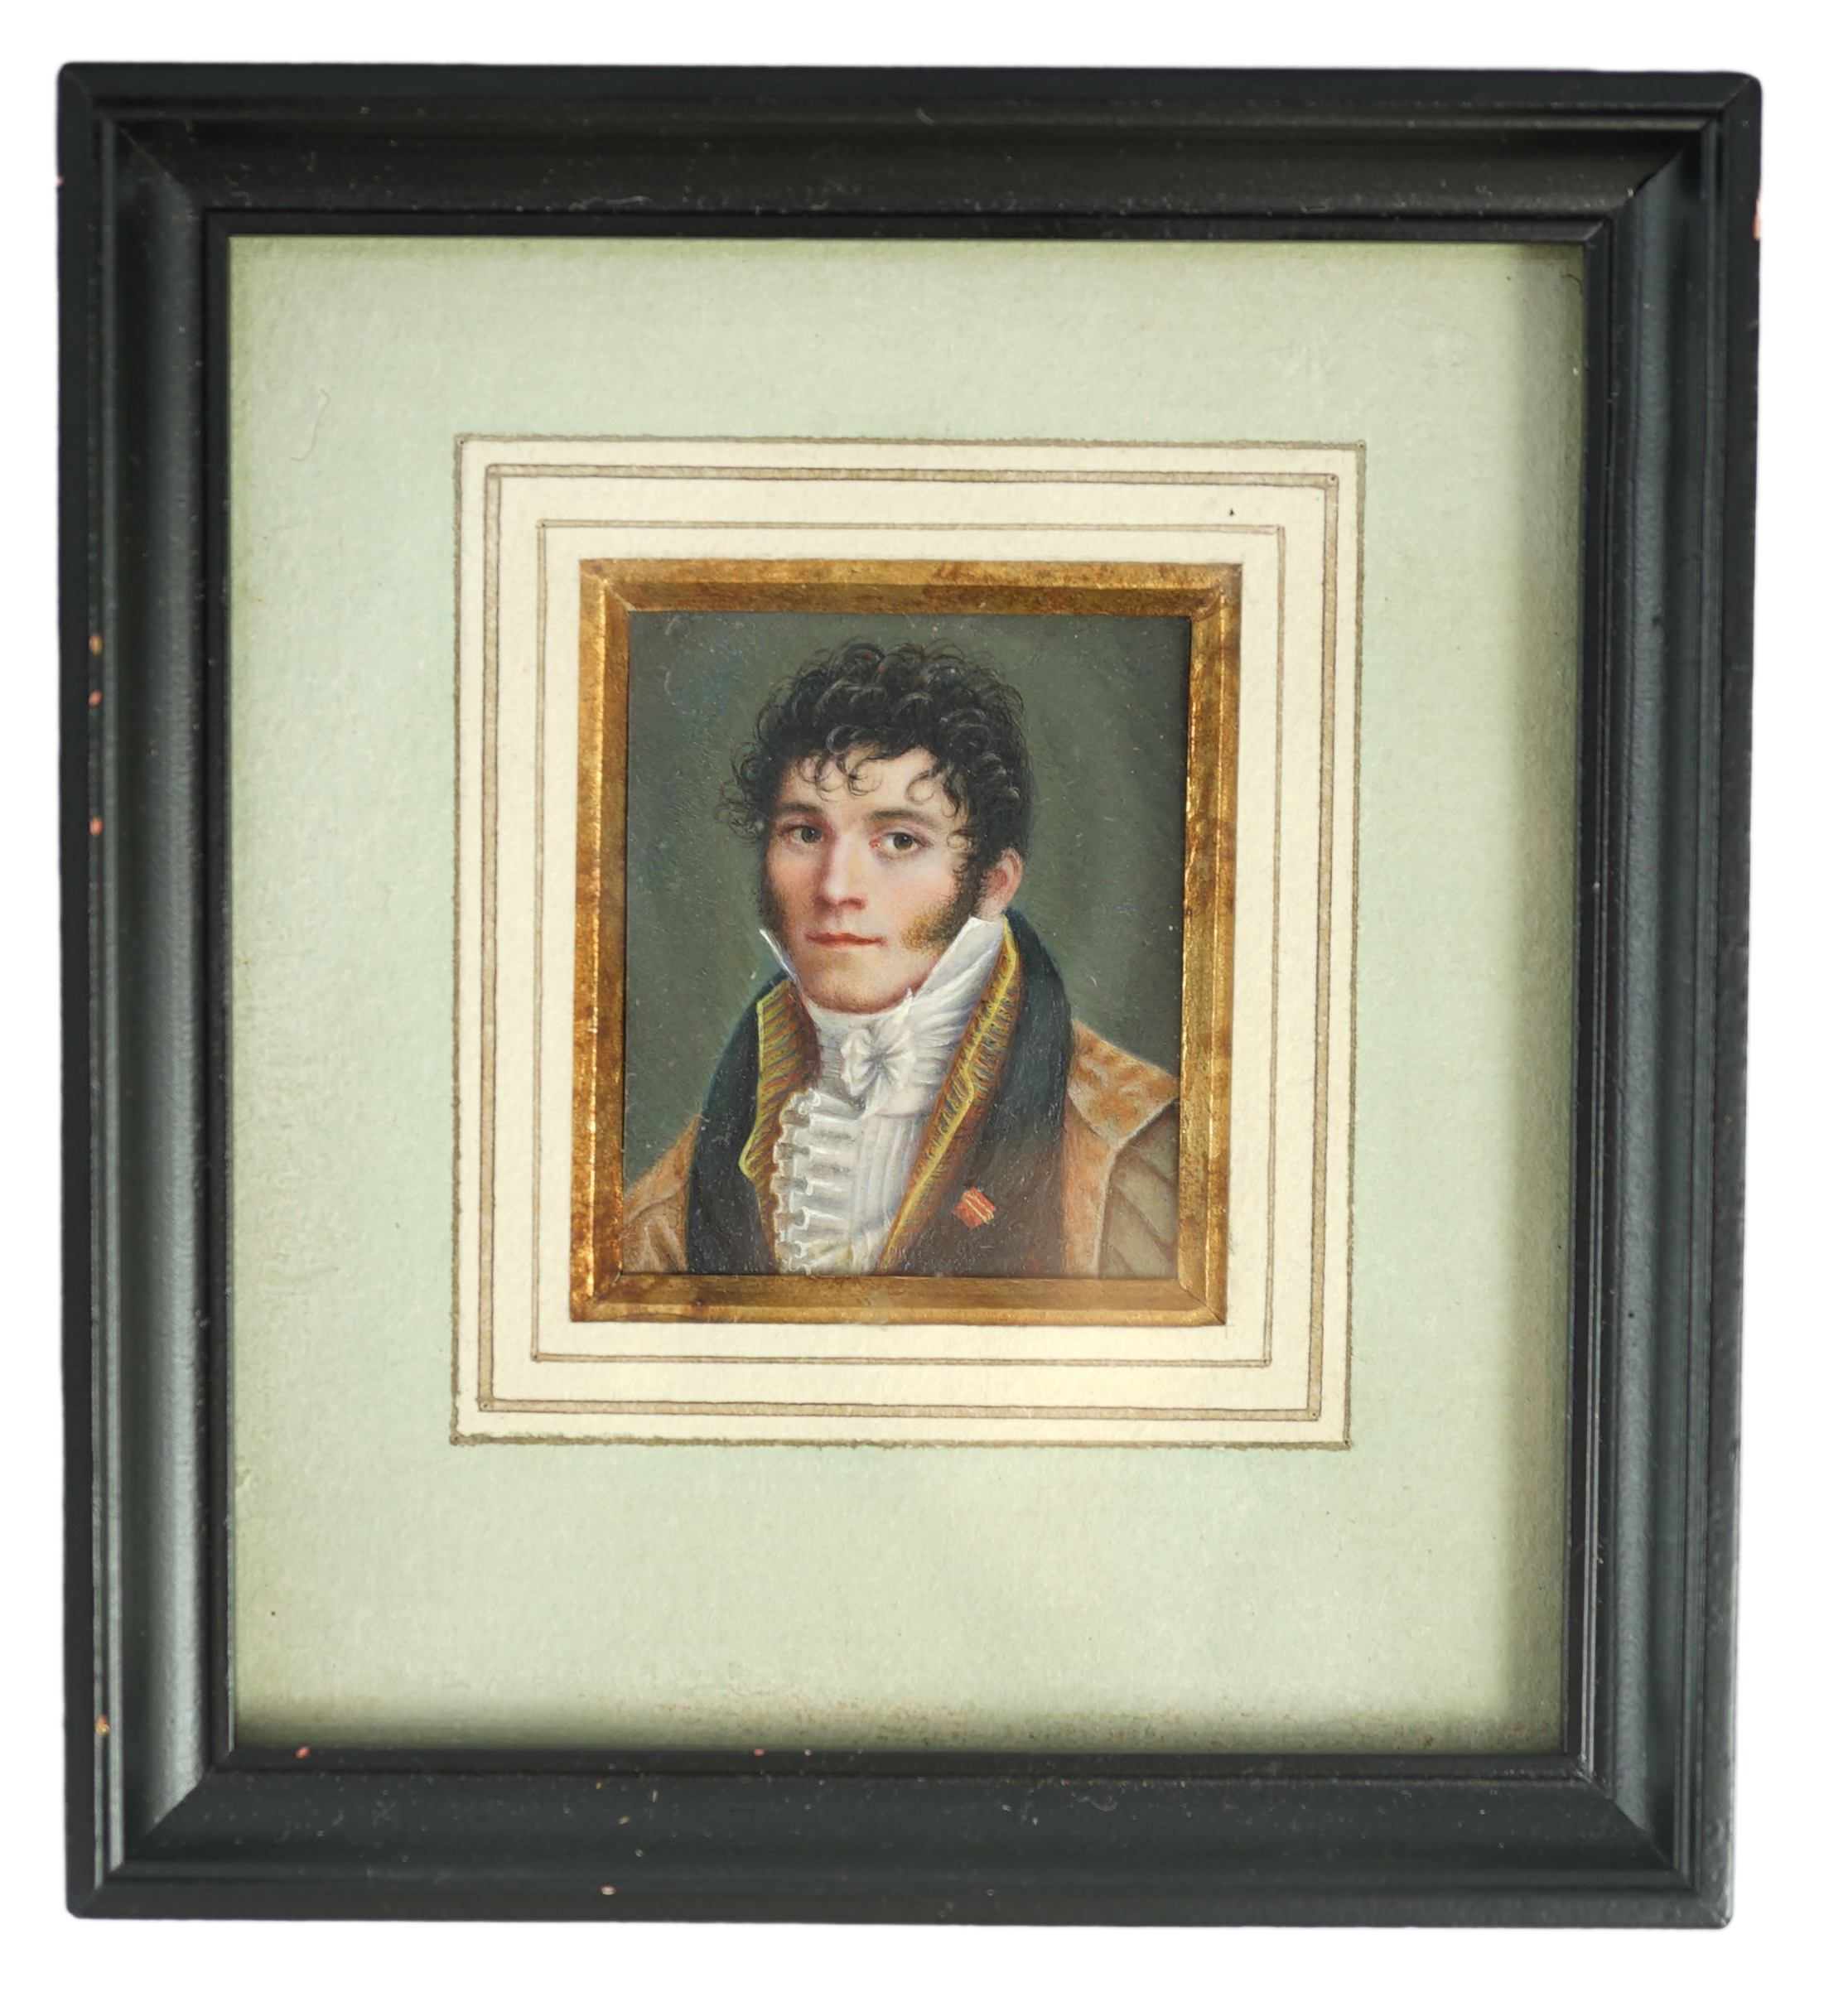 French School circa 1830, Portrait miniature of a gentleman wearing an elaborate lace shirt, watercolour on ivory, 3.9 x 3.4cm. CITES Submission reference RDKXH1EL